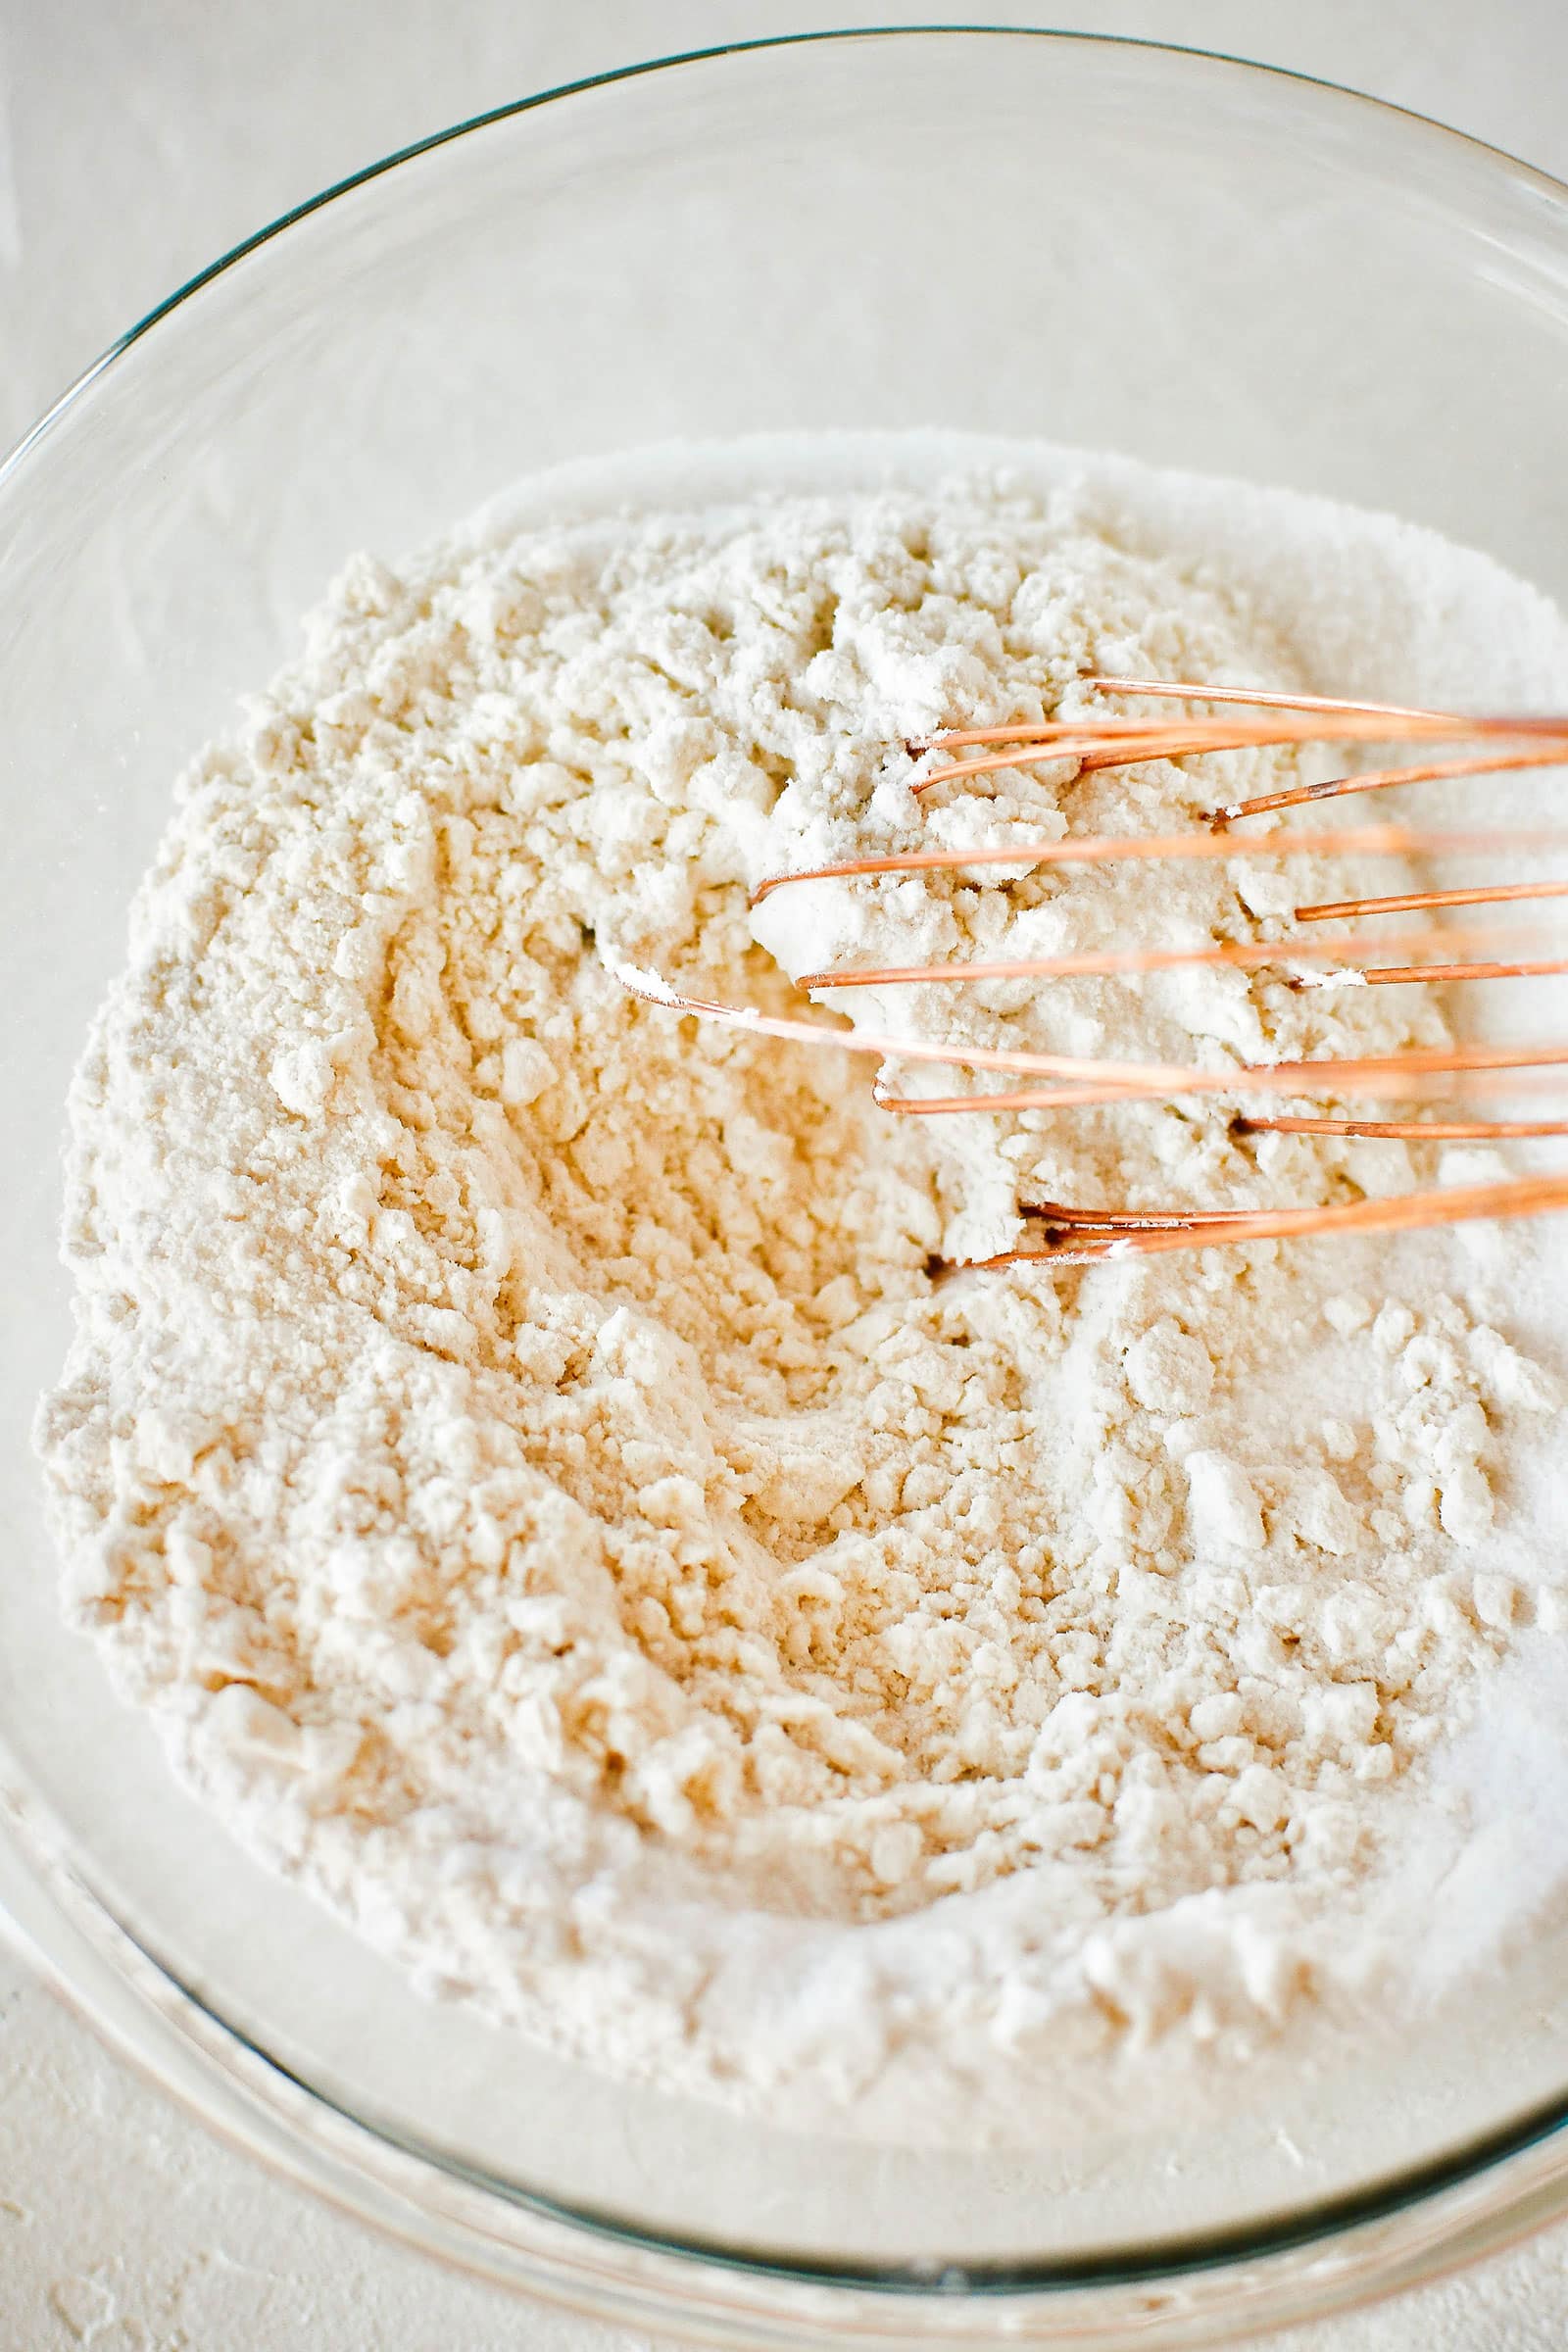 A whisk mixing all the dry ingredients together in a bowl